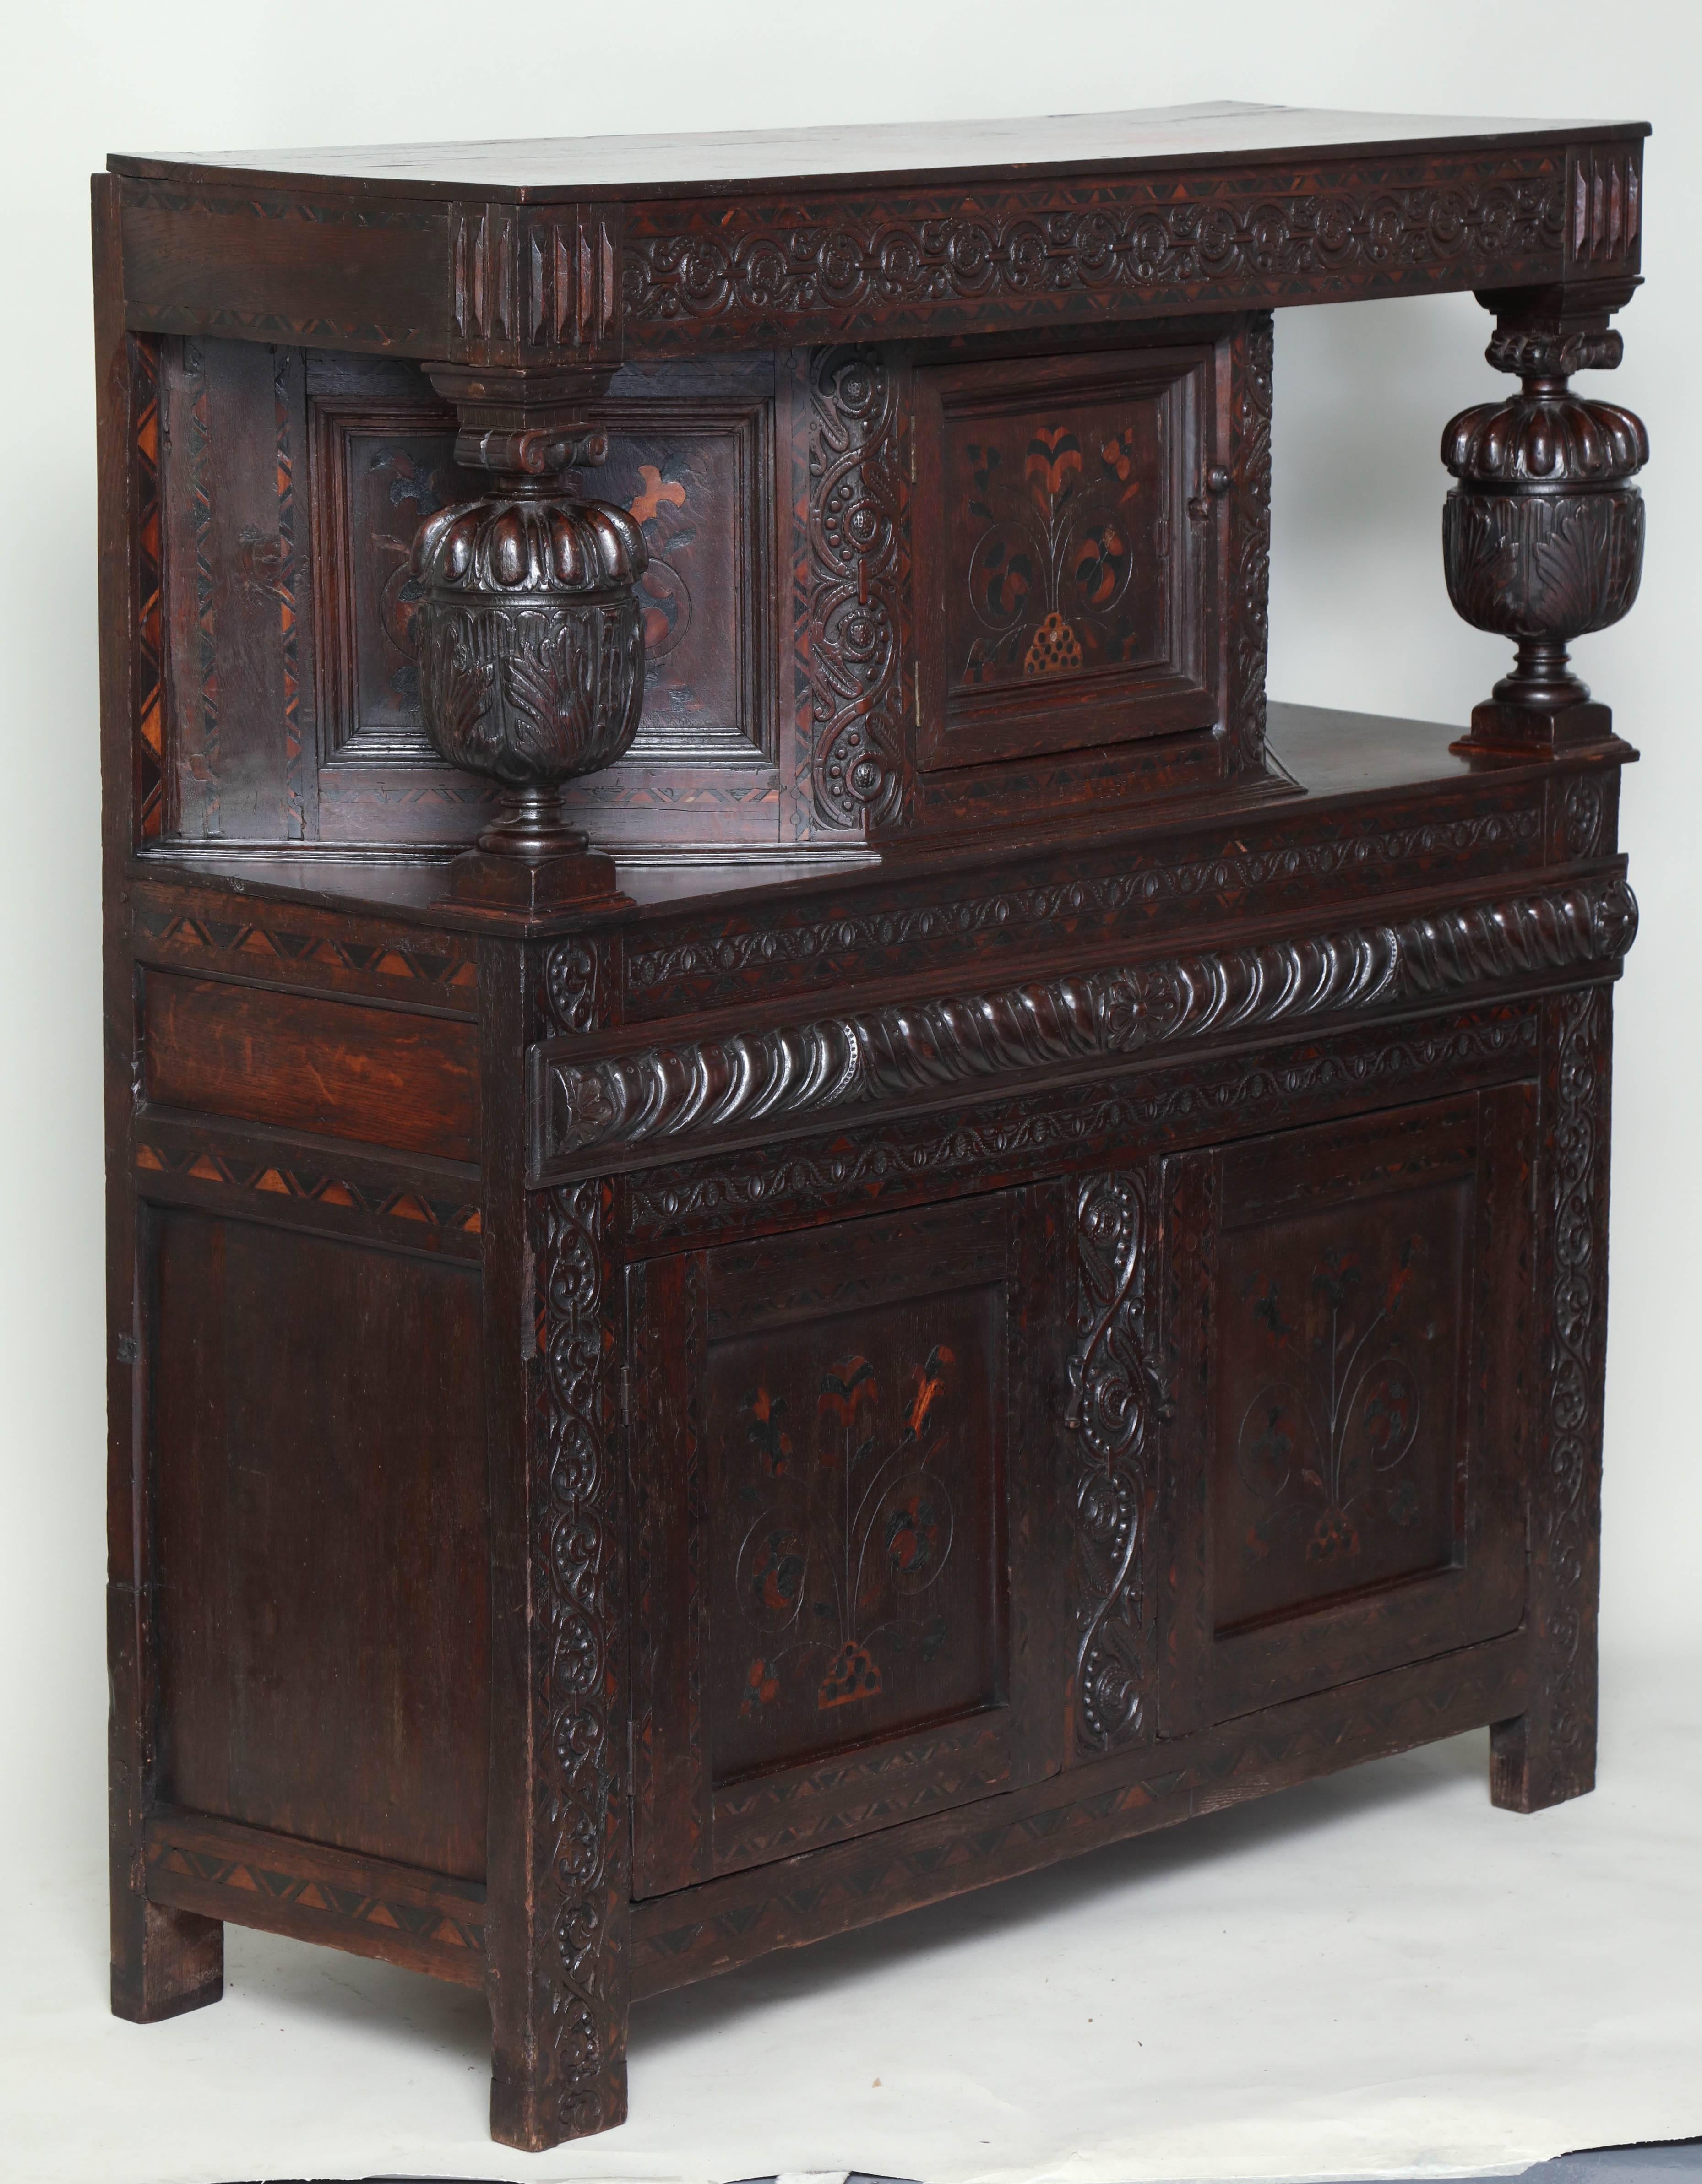 Very rare late Elizabethan inlaid oak court cupboard profusely carved and inlaid with sycamore and bog oak with arabesque chip carved frieze over rich cup and cover carved supports having canted cupboard in the upper section, two more arabesque